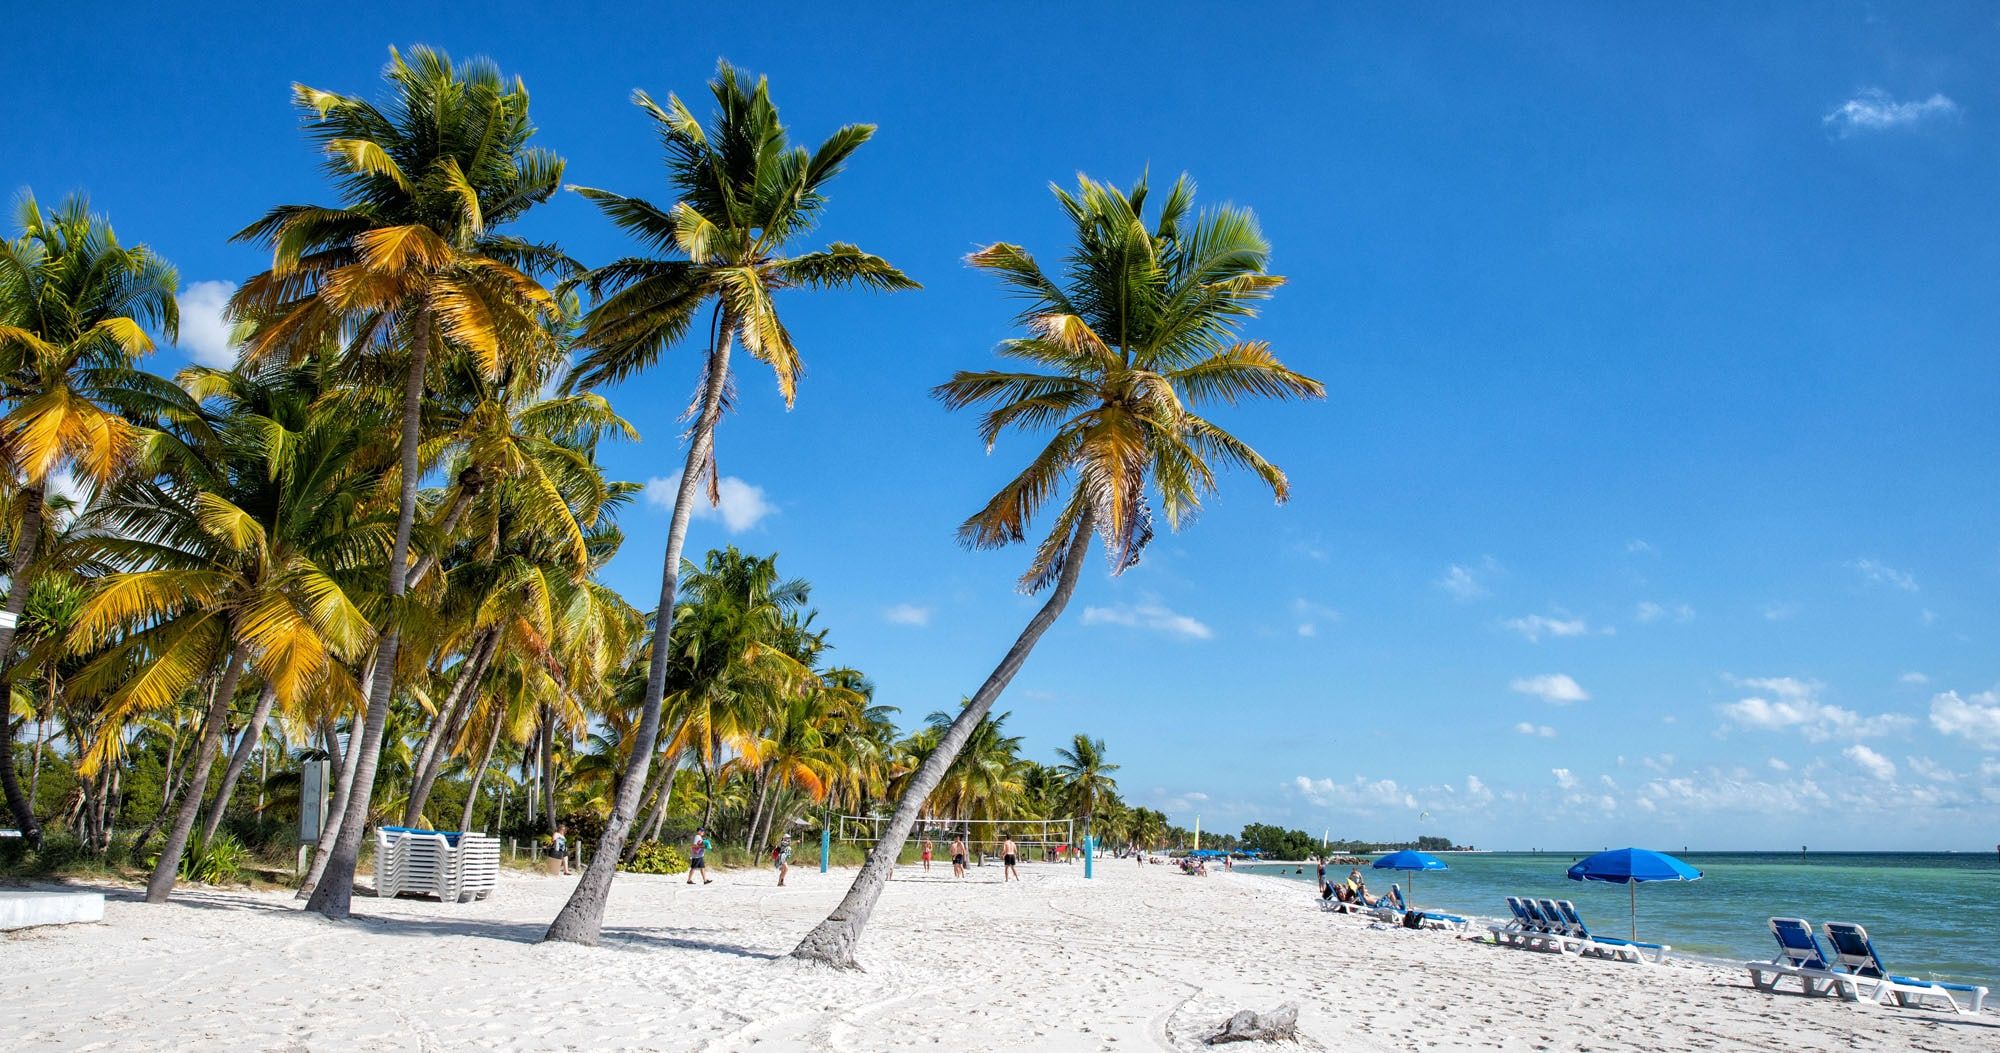 Featured image for “18 Great Things to Do in Key West, Florida”